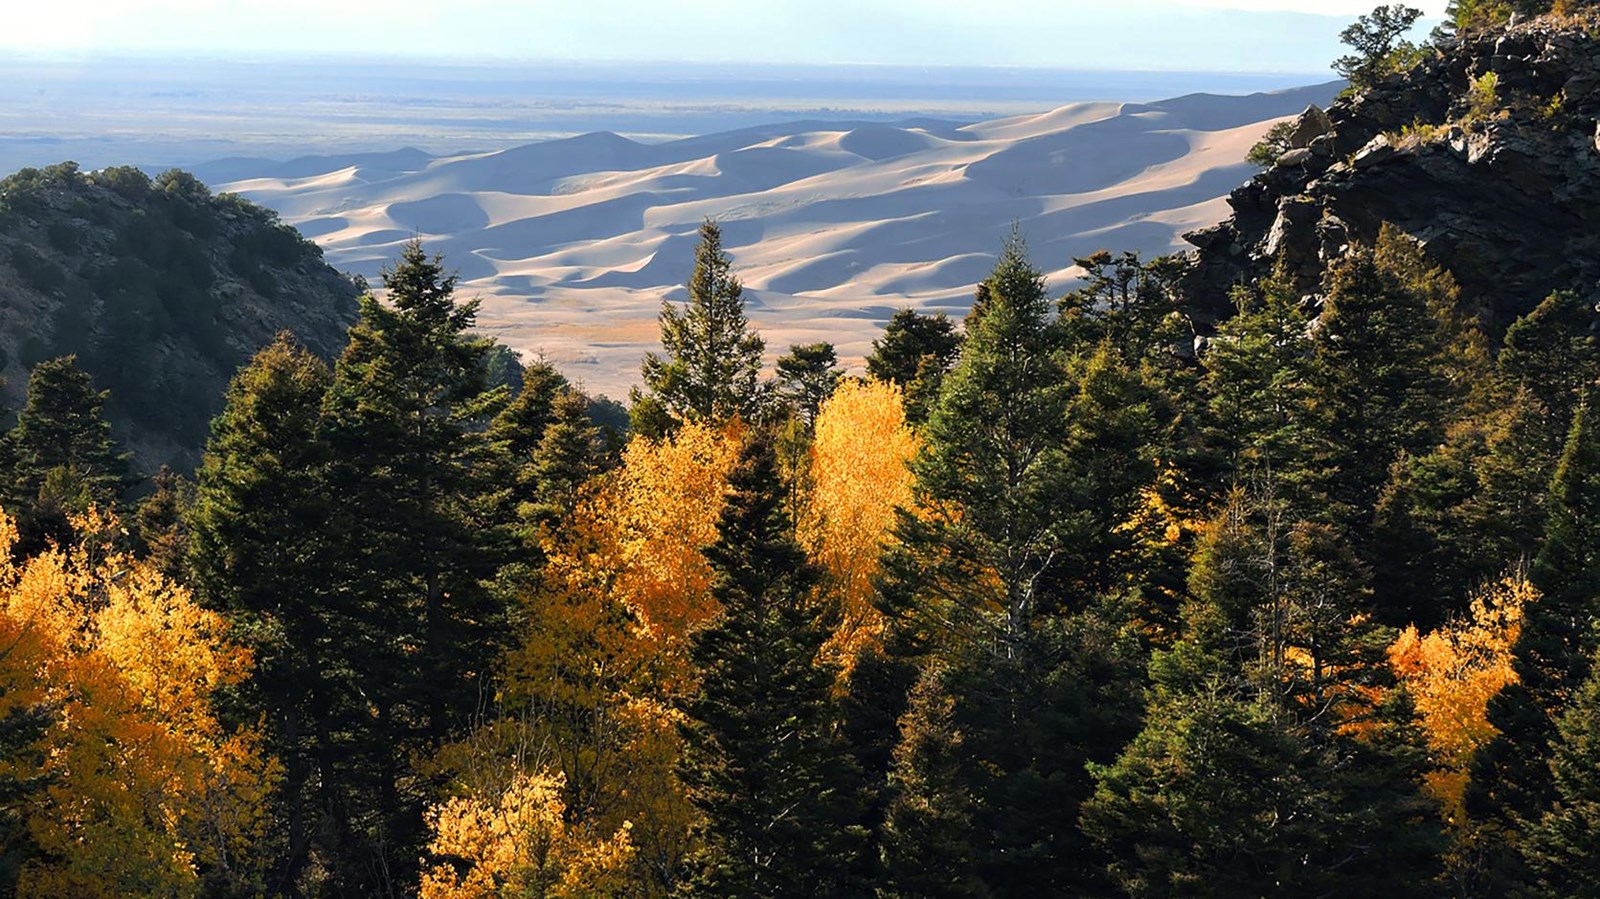 Looking down a forested canyon with gold aspen trees and conifers to dunes